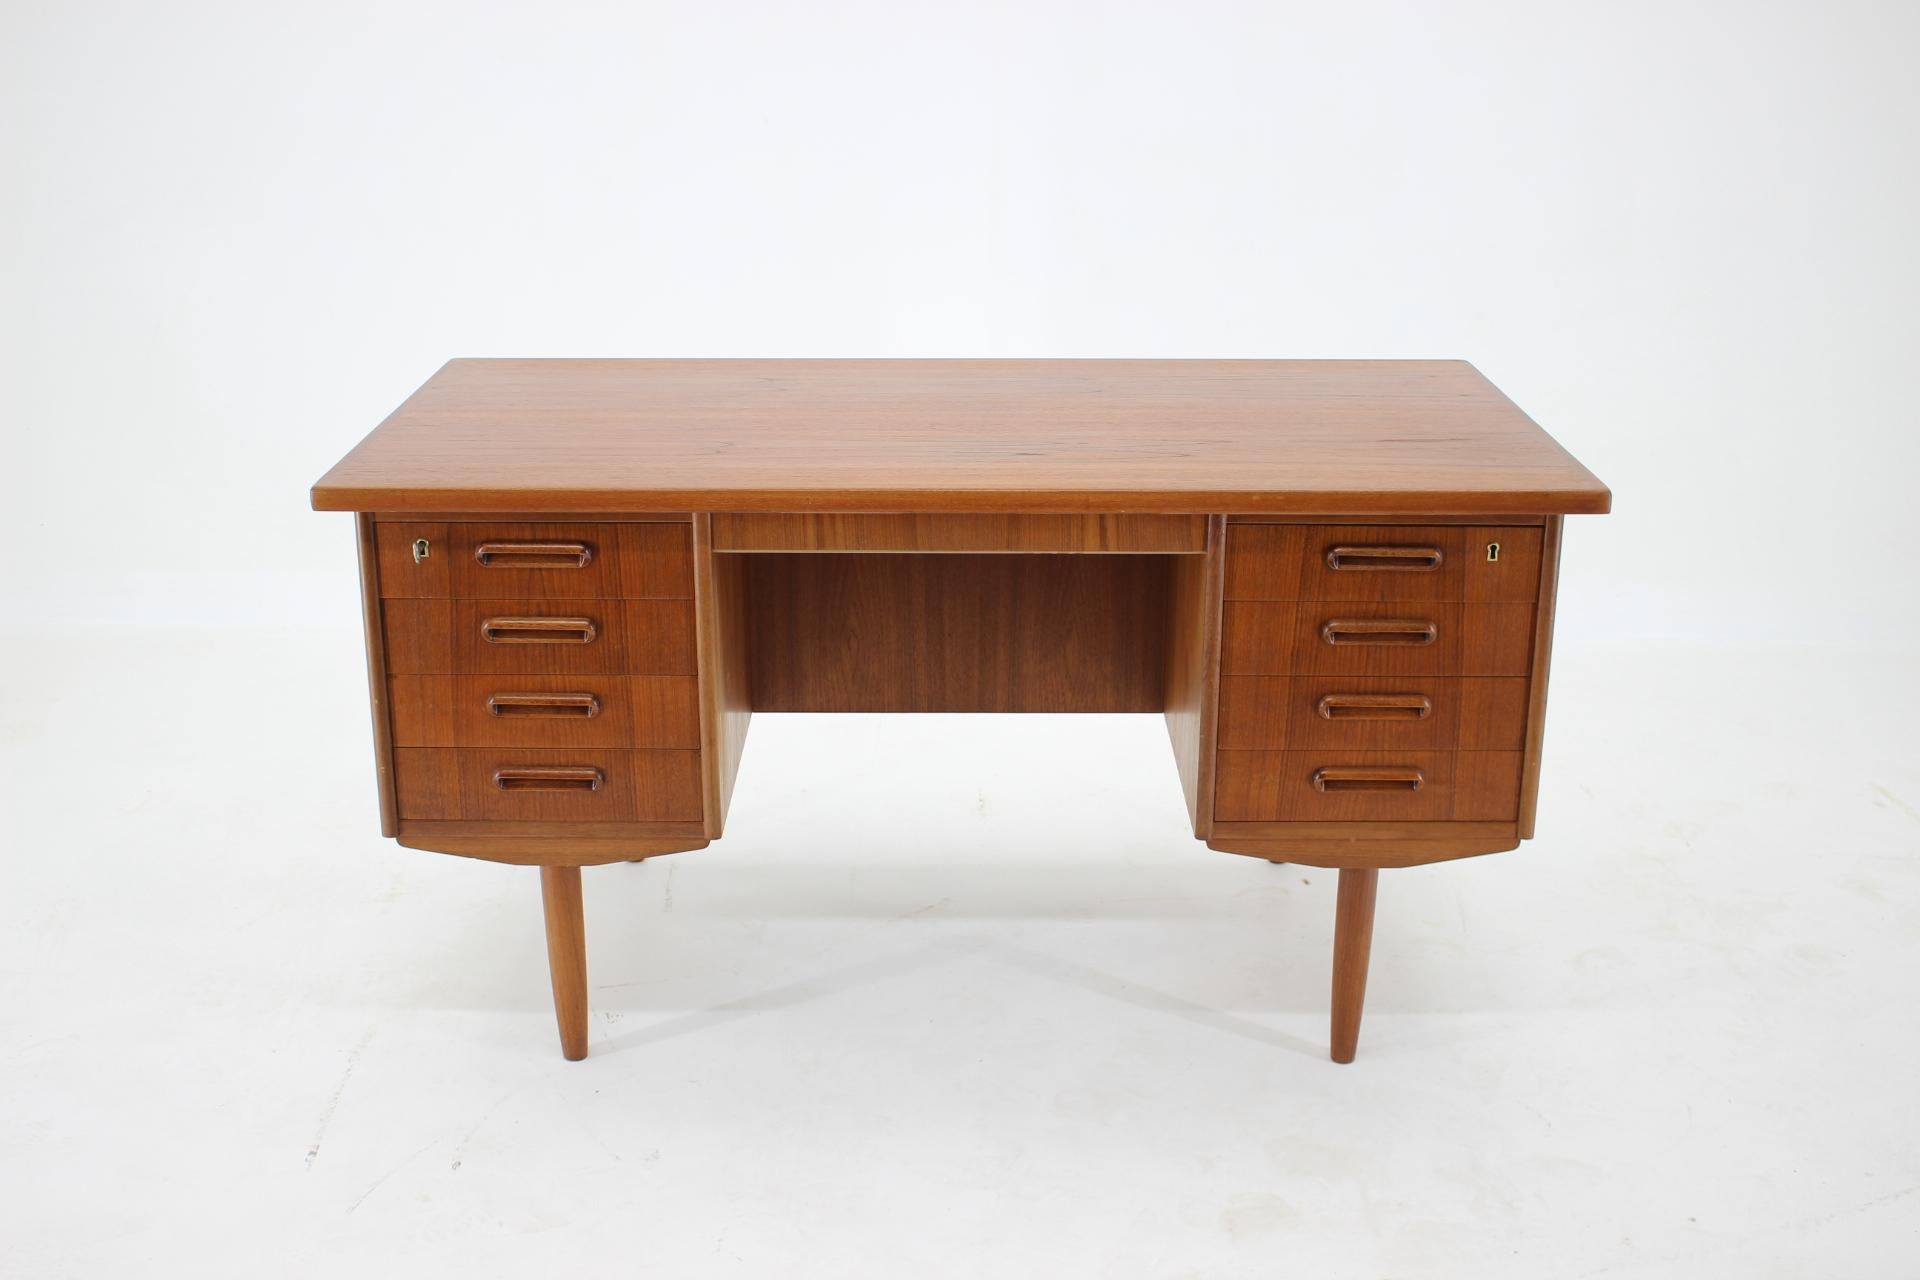 - The desk features eight drawers and in the back has storage compartment
- This item was carefully restored.